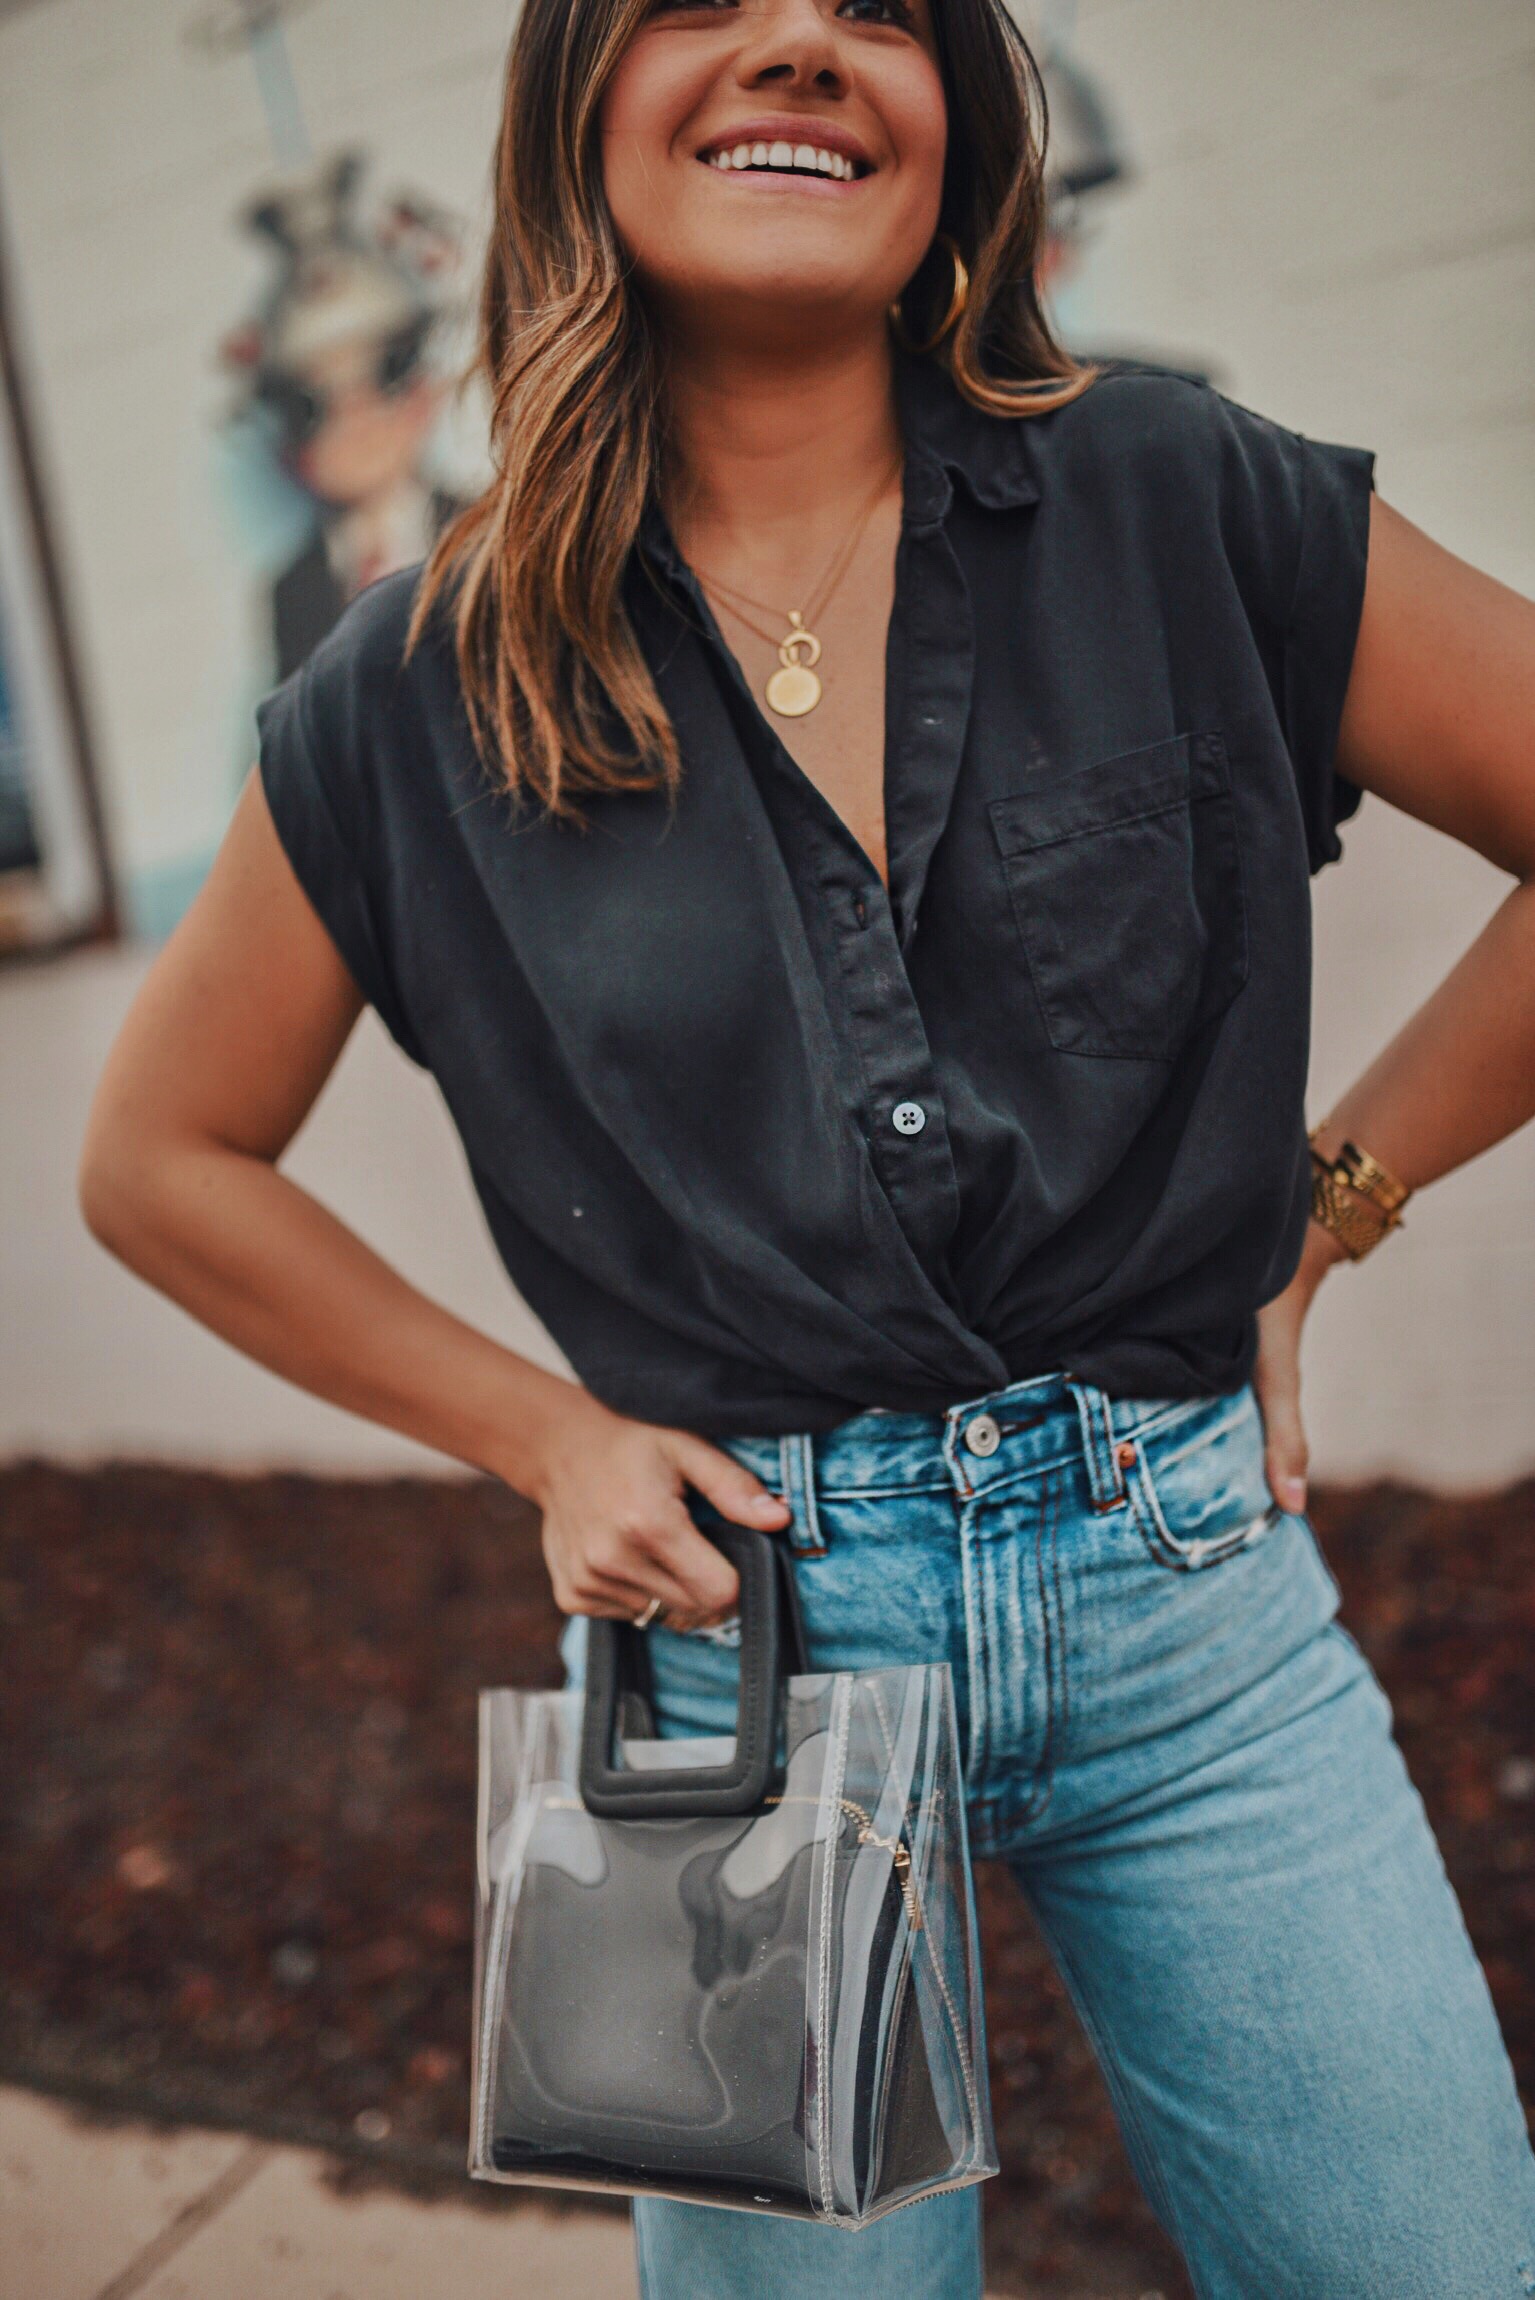 Carolina Hellal of Chic Talk wearing Abercrombie & Fitch wide leg jeans and a black crop shirt, Steve Madden black strap sandals and clear STAUD clothing bag